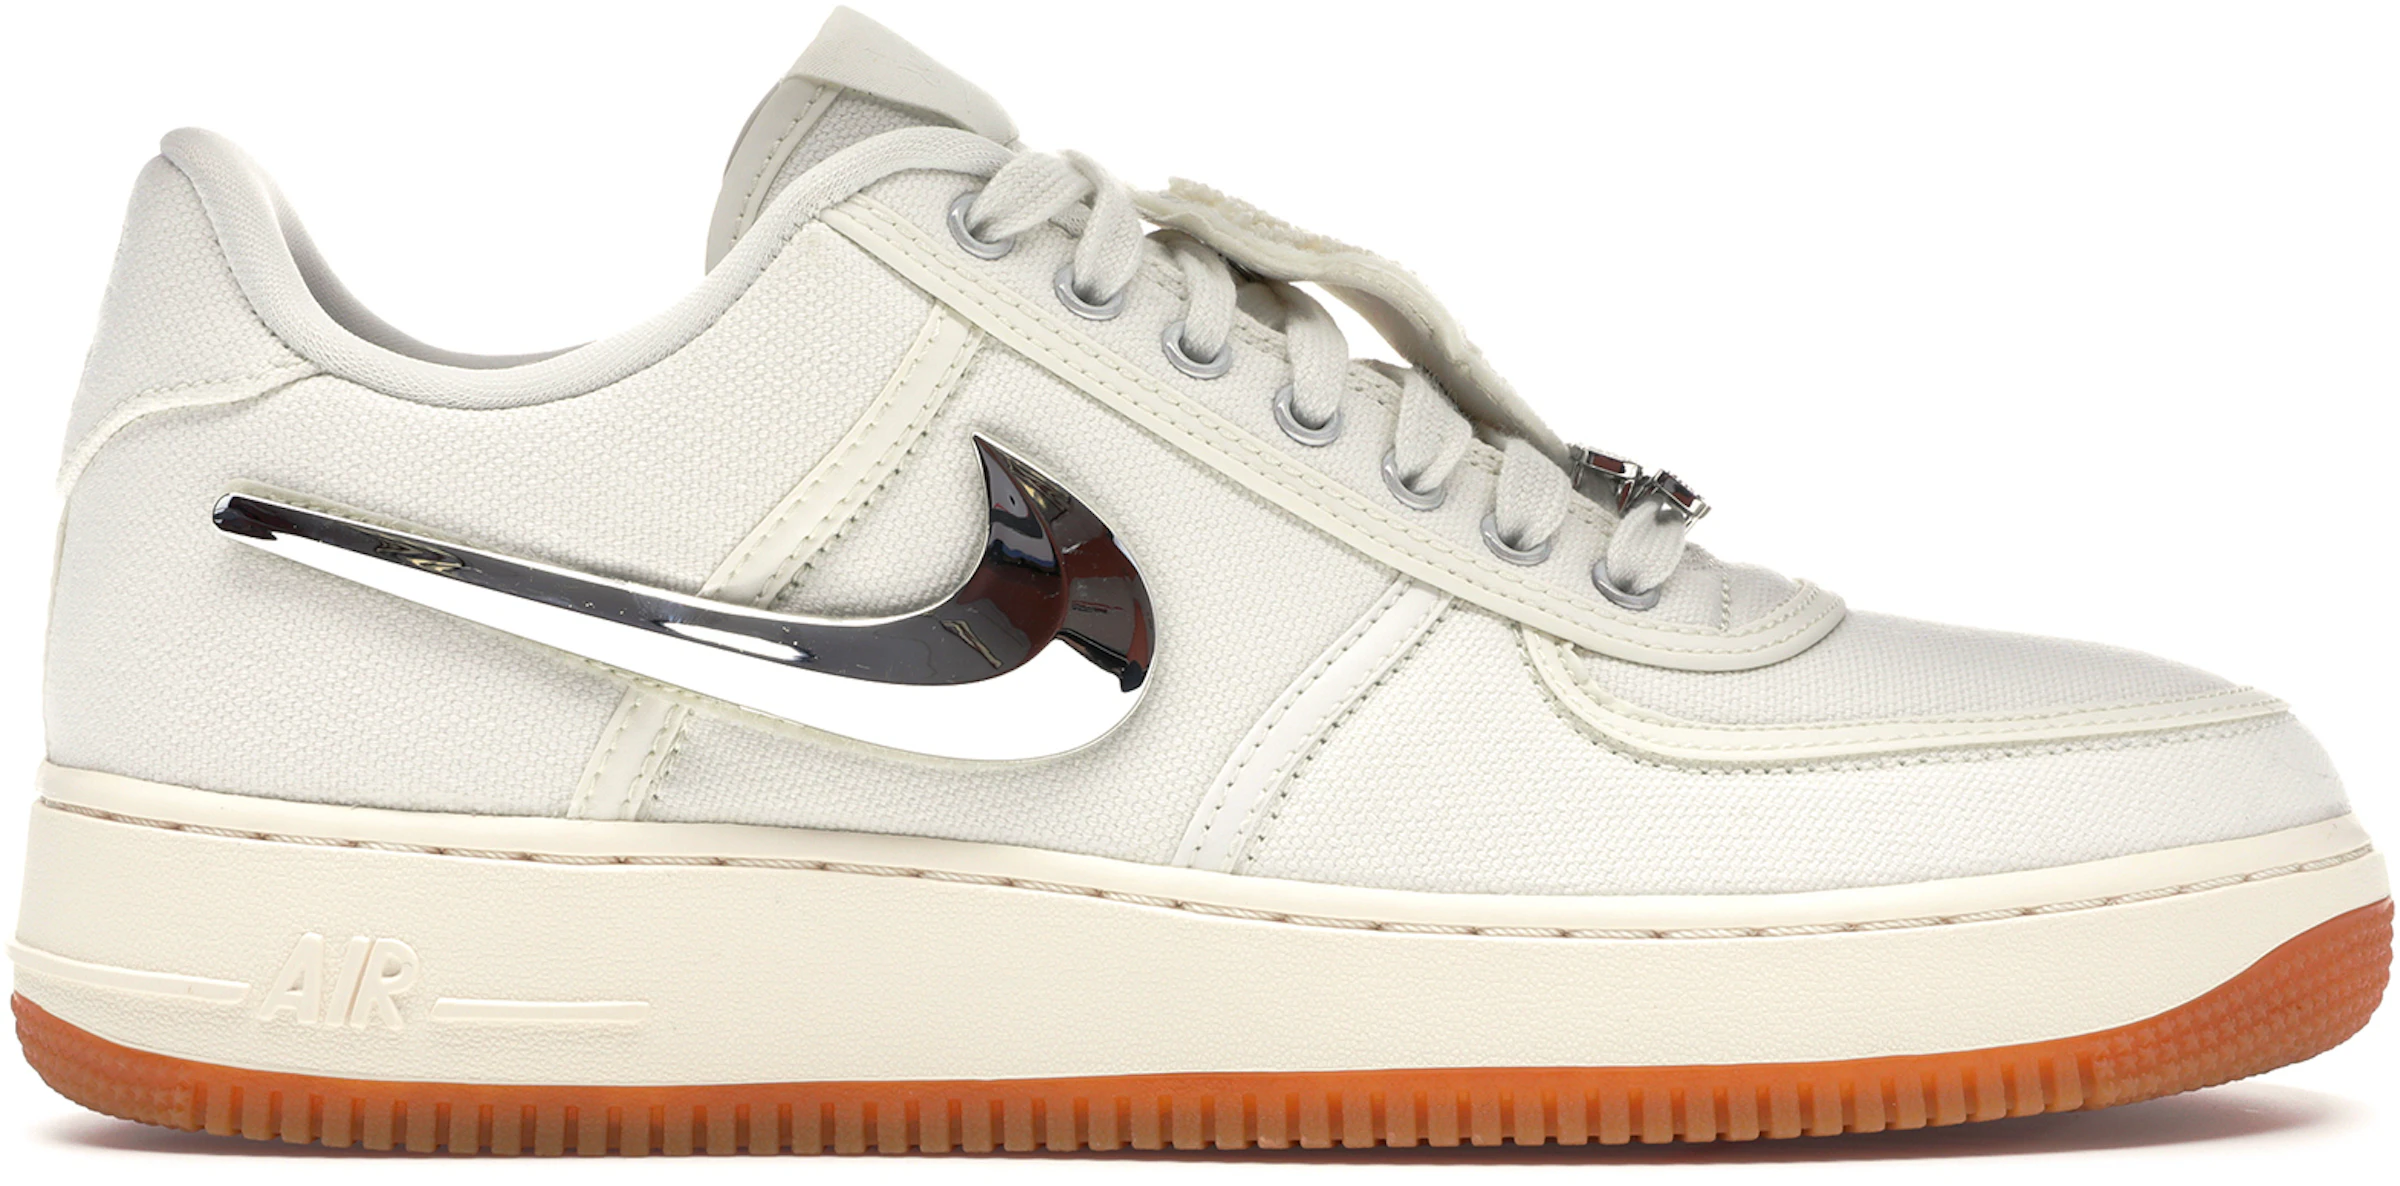 Nike Air Force 1 Shoes - Average Sale Price